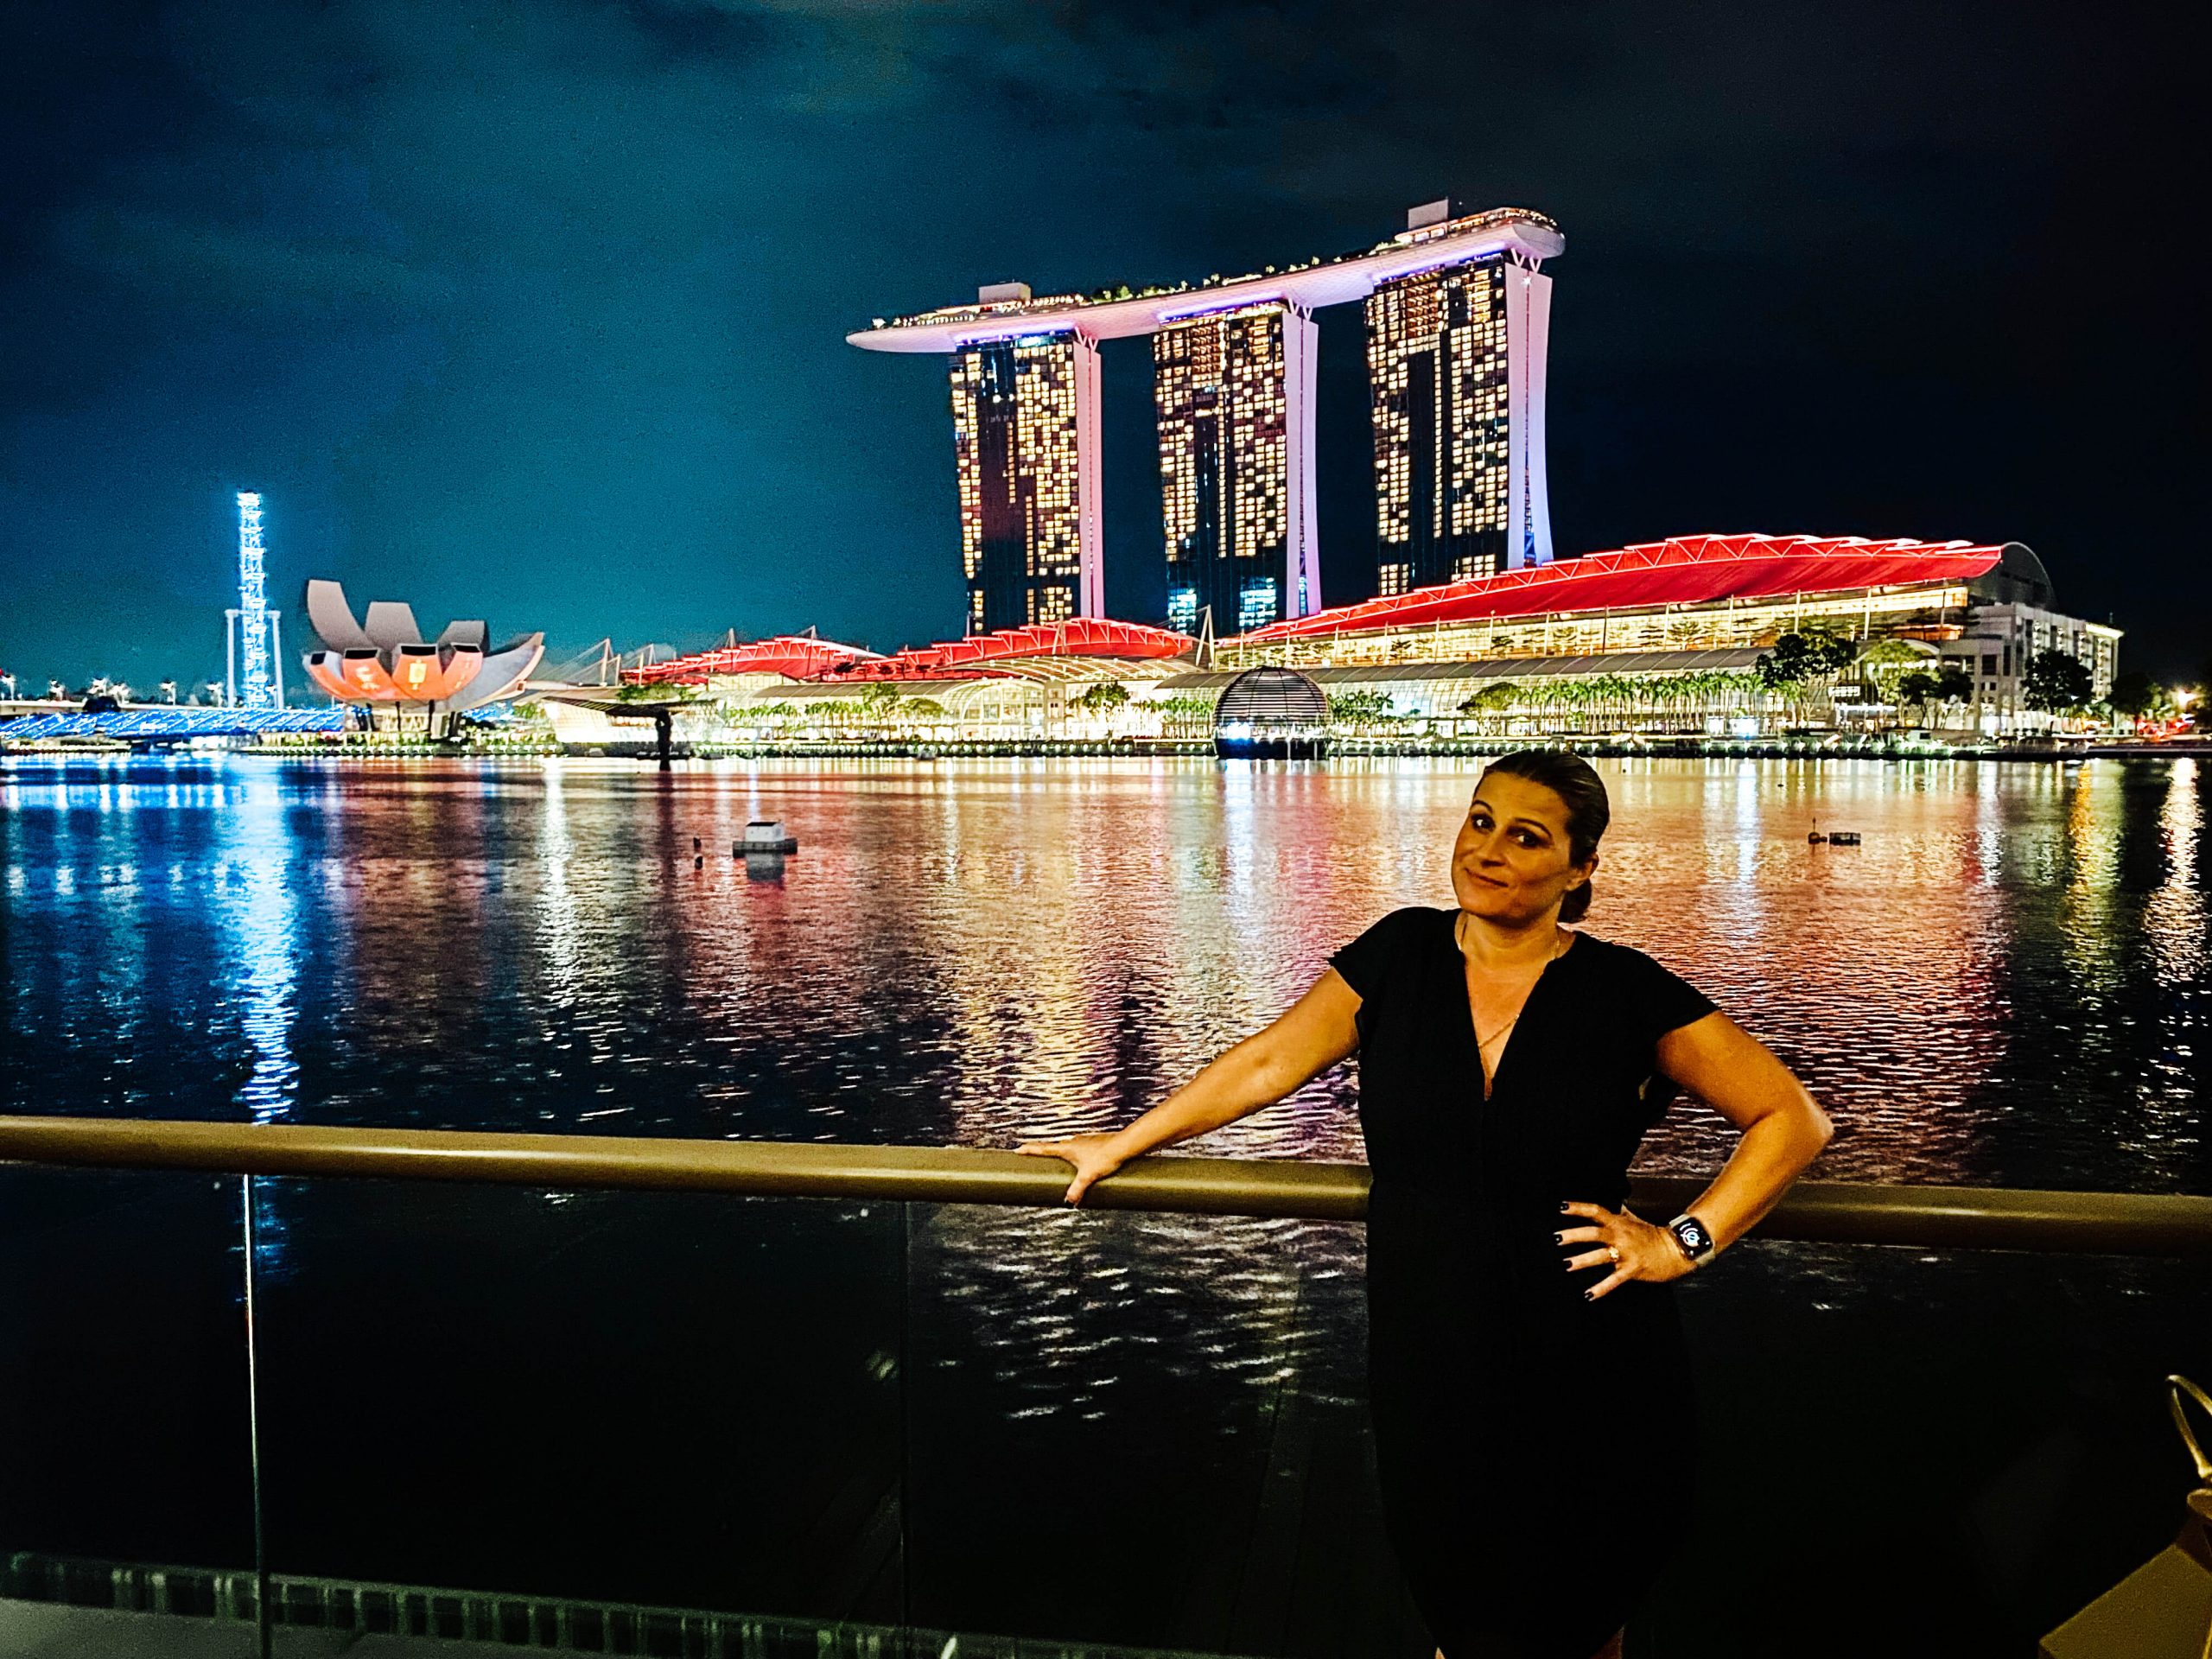 standing in front of the marina bay sands at night